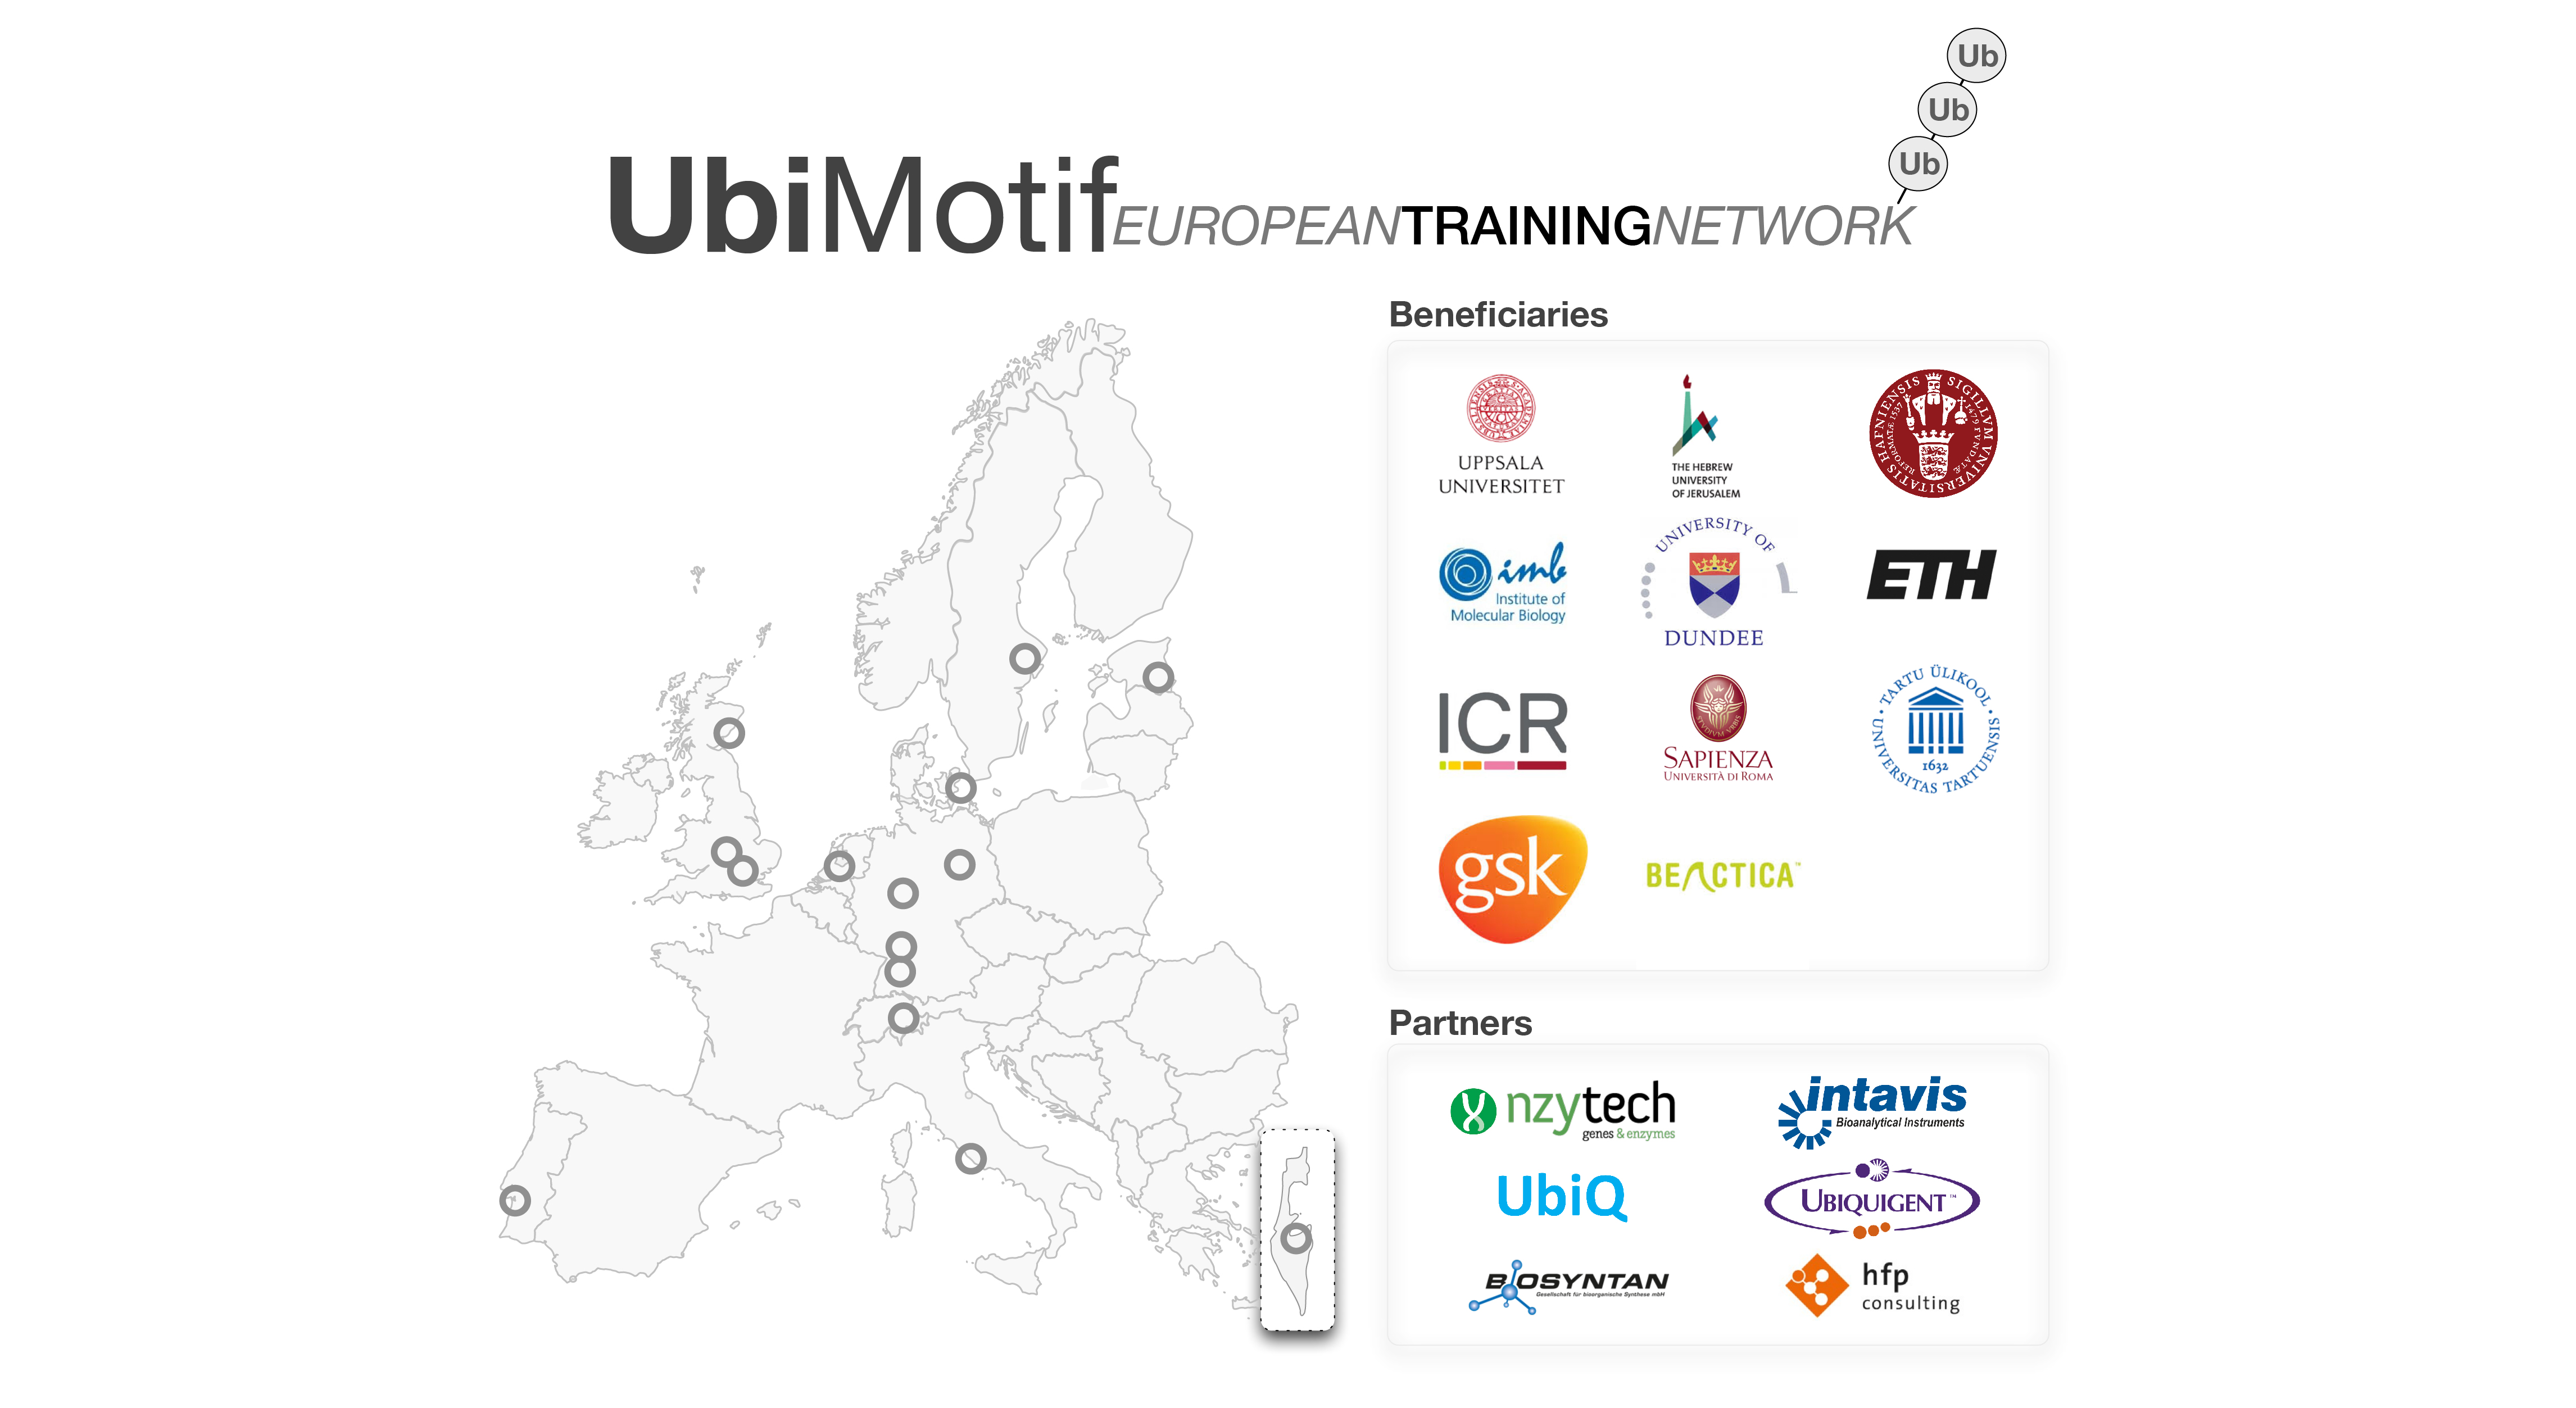 Overview of the UBIMOTIF network